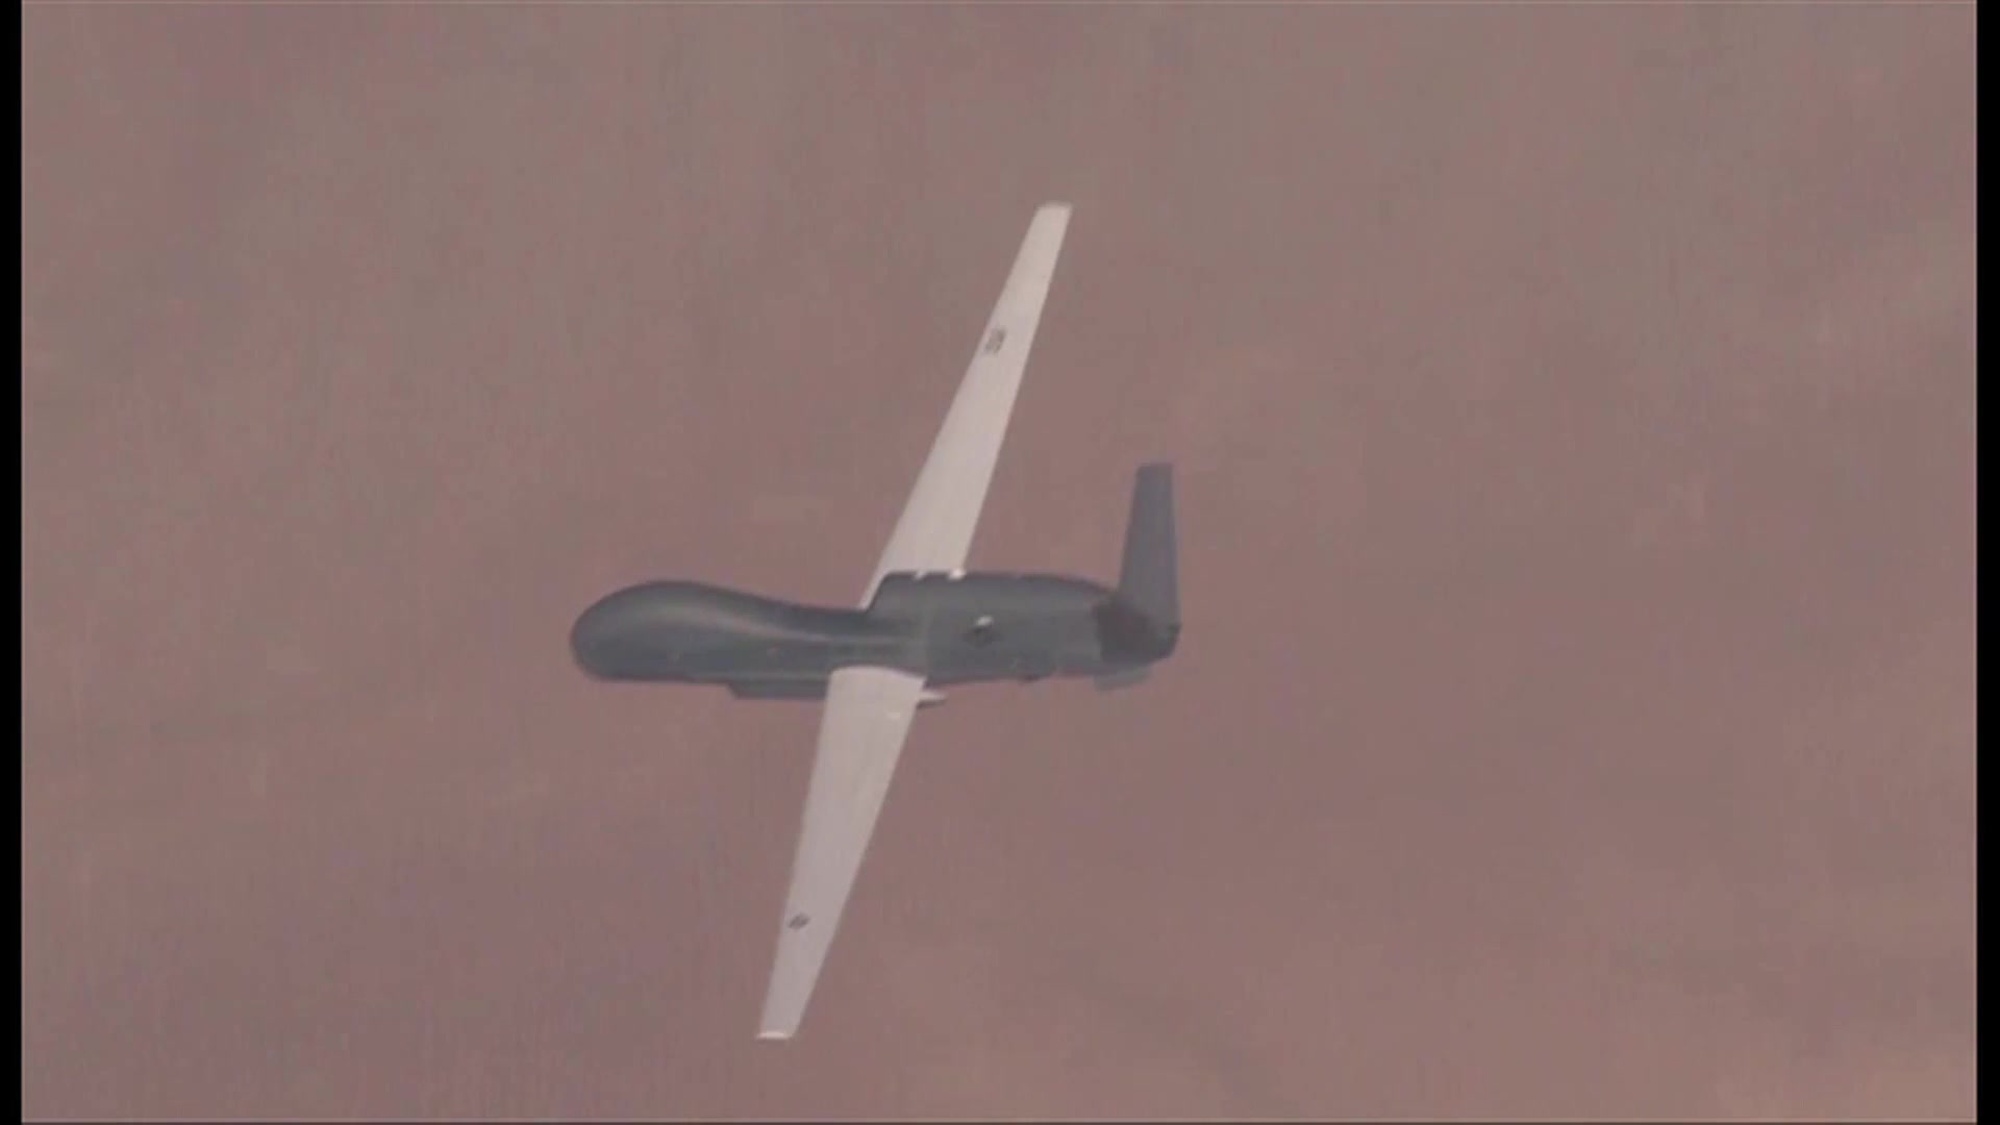 The first of NATO’s five unmanned air vehicles rolled off the factory line in San Diego on Thursday, 4 June 2015.  The Global Hawk Block 40 is part of the Alliance Ground Surveillance Program (AGS).  The NATO-owned and -operated AGS core capability will enable the Alliance to perform persistent surveillance over wide areas from high-altitude long-endurance  aircraft  in any weather or light condition . The system will give commanders a comprehensive picture of the situation on the ground.
The AGS system is being acquired by 15 Allies (Bulgaria, Czech Republic, Denmark, Estonia, Germany, Italy, Latvia, Lithuania, Luxembourg, Norway, Poland, Romania, Slovakia, Slovenia and the United States). AGS is scheduled to reach initial operational capability by the end of 2017. The air vehicles will be controlled from the main operating centre in Sigonella, Italy.